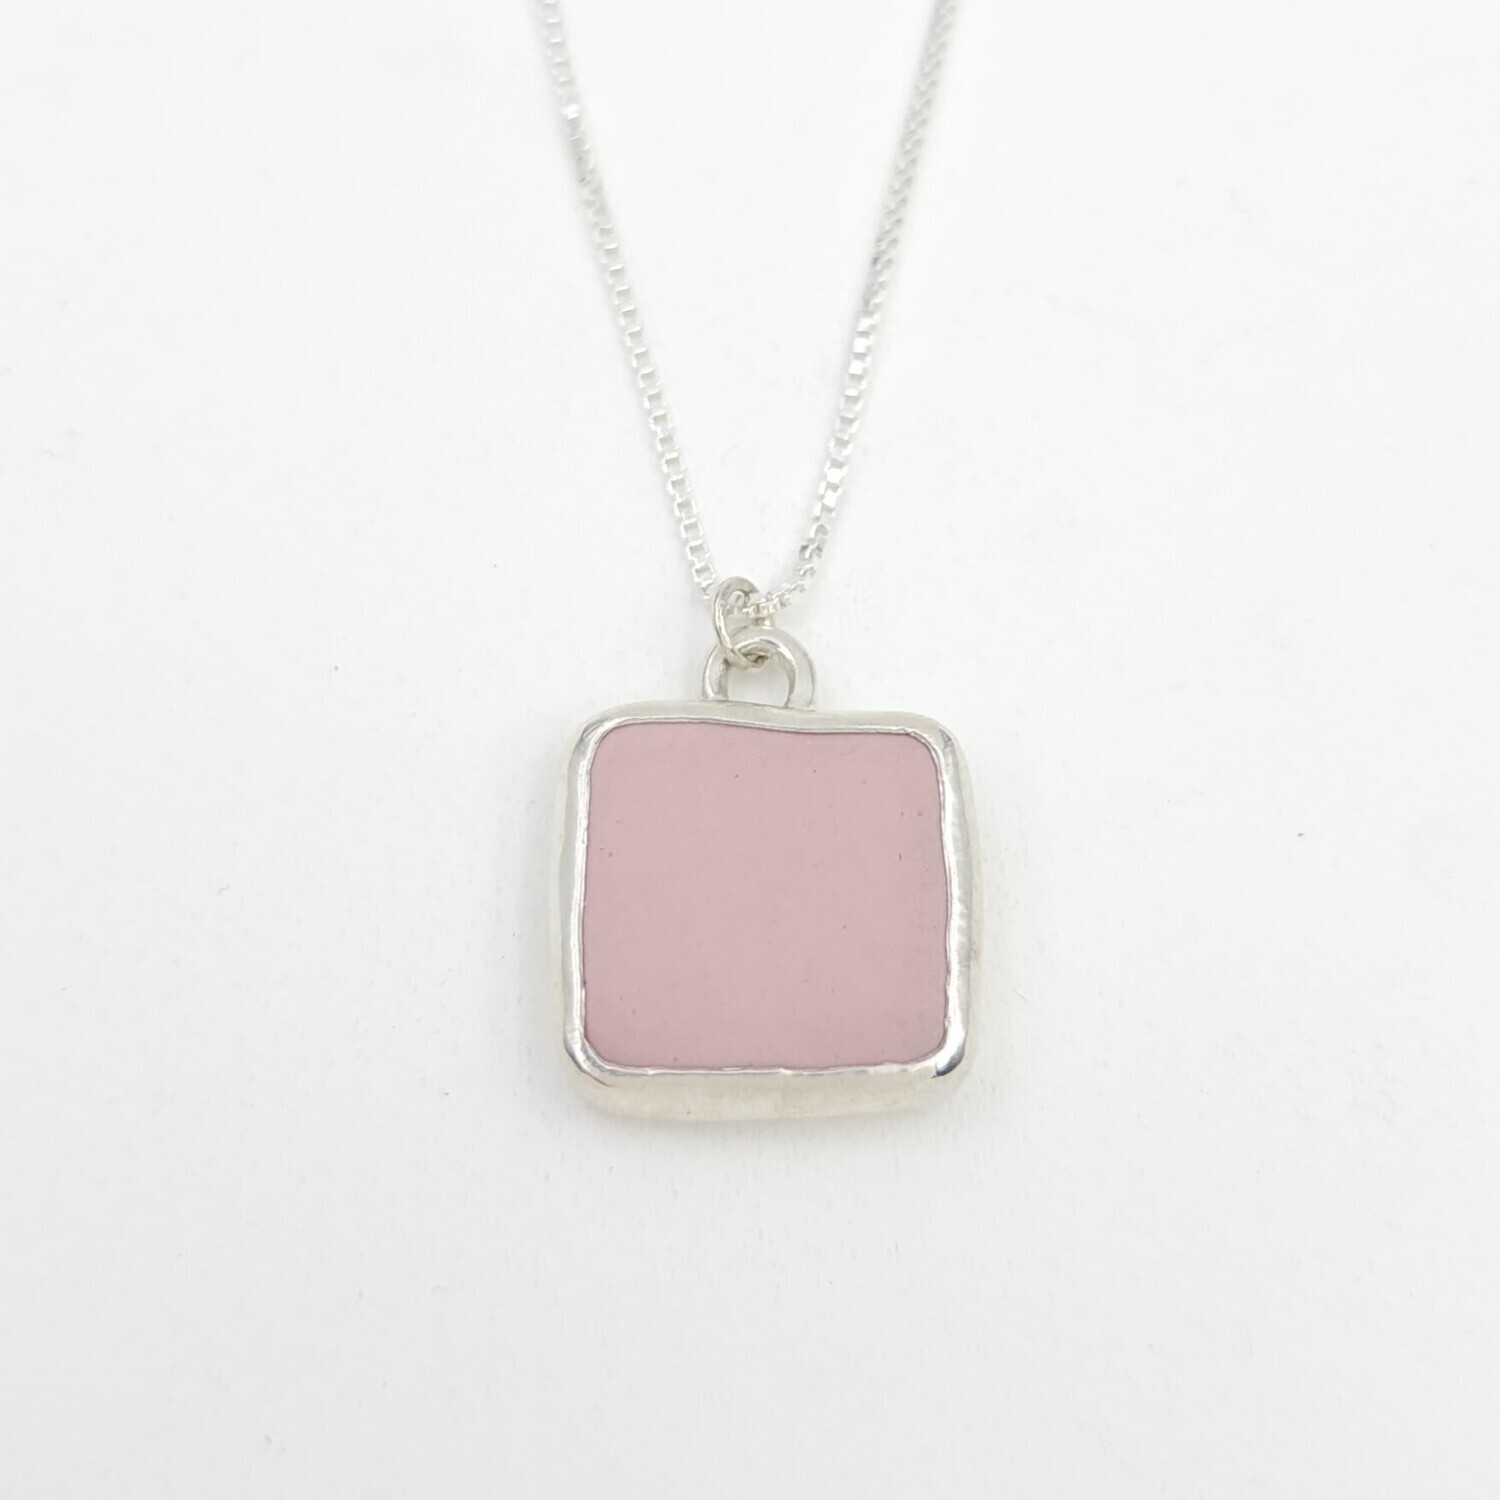 Double Sided Lake Erie Beach Tile Necklace in Sterling Silver